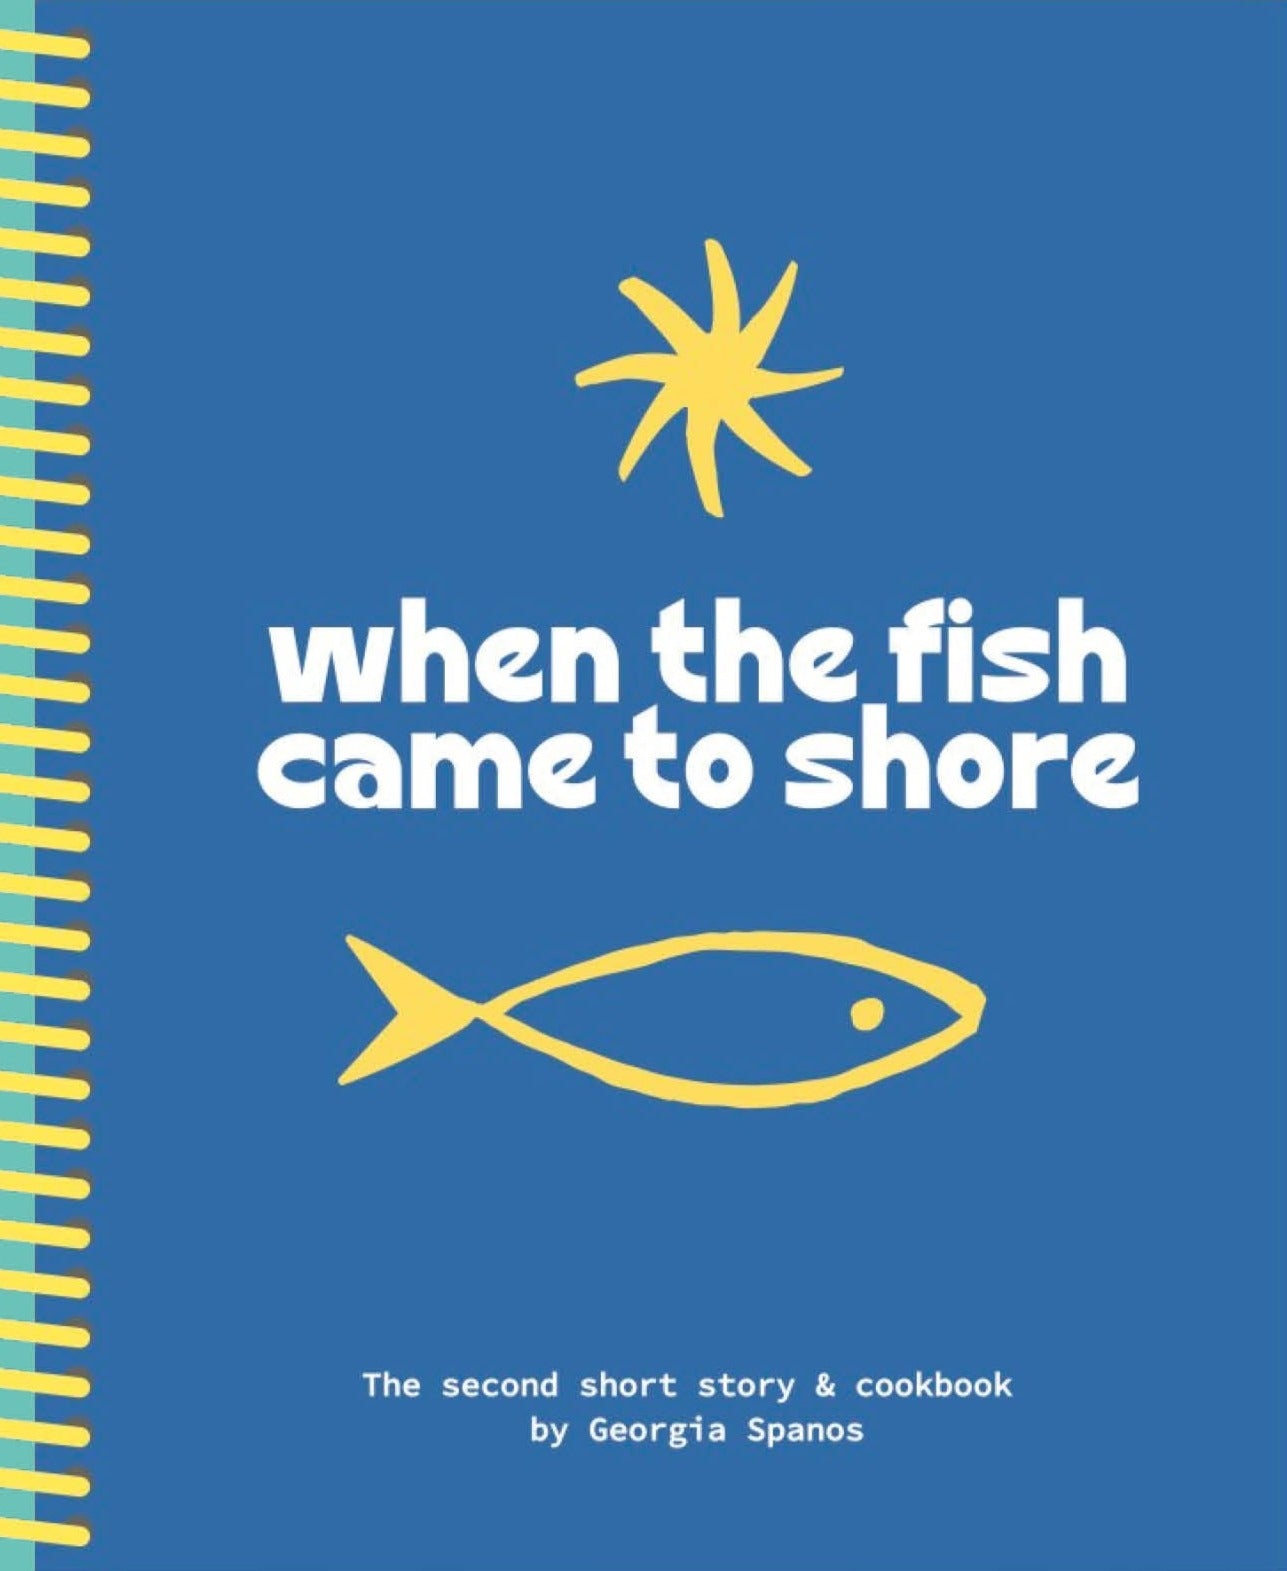 When the fish came to shore